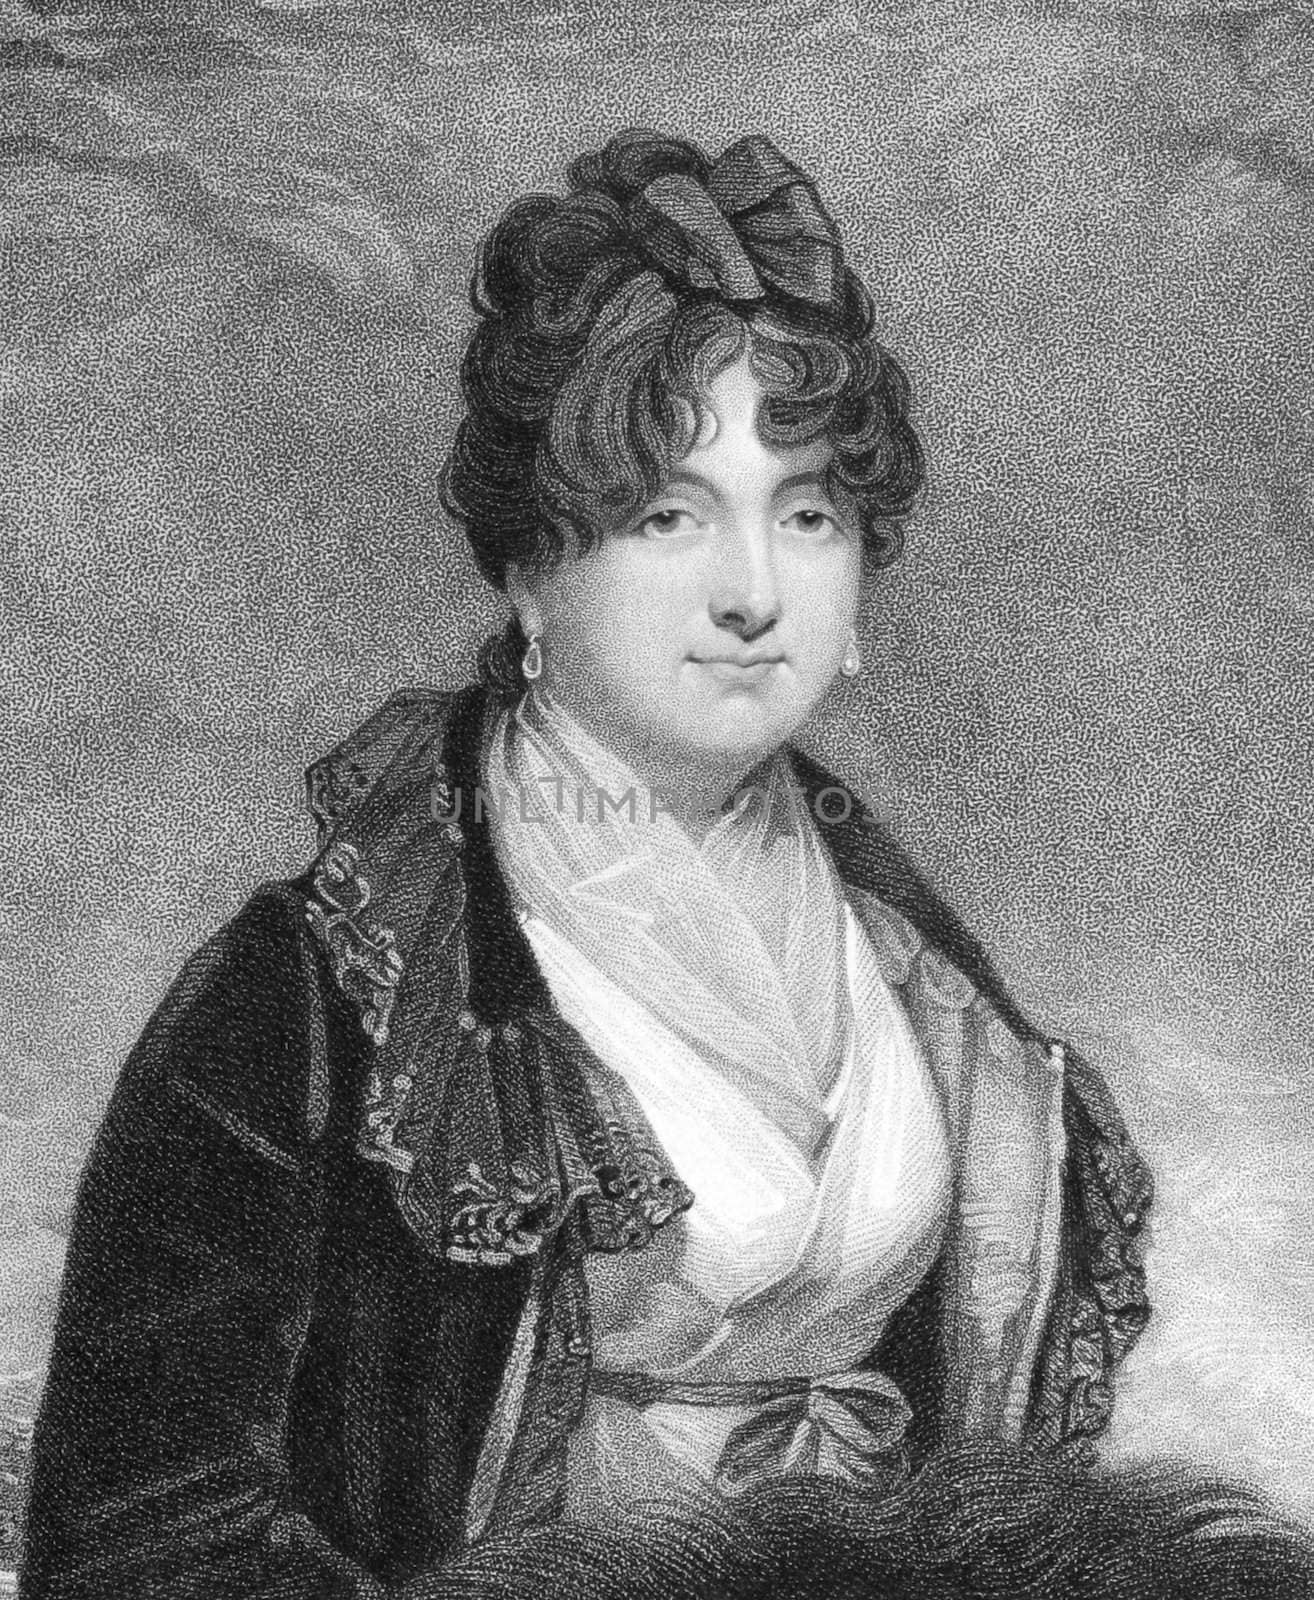 Charlotte Spencer, Countess Spencer (1835-1903) on engraving from the 1800s. Daughter of the Earl of Lucan. Married to 2nd Earl Spencer. Famed for her beauty and intelligence. Engraved by T.Williamson after a picture by M.A.Shee and published for J.Bell in 1813.
